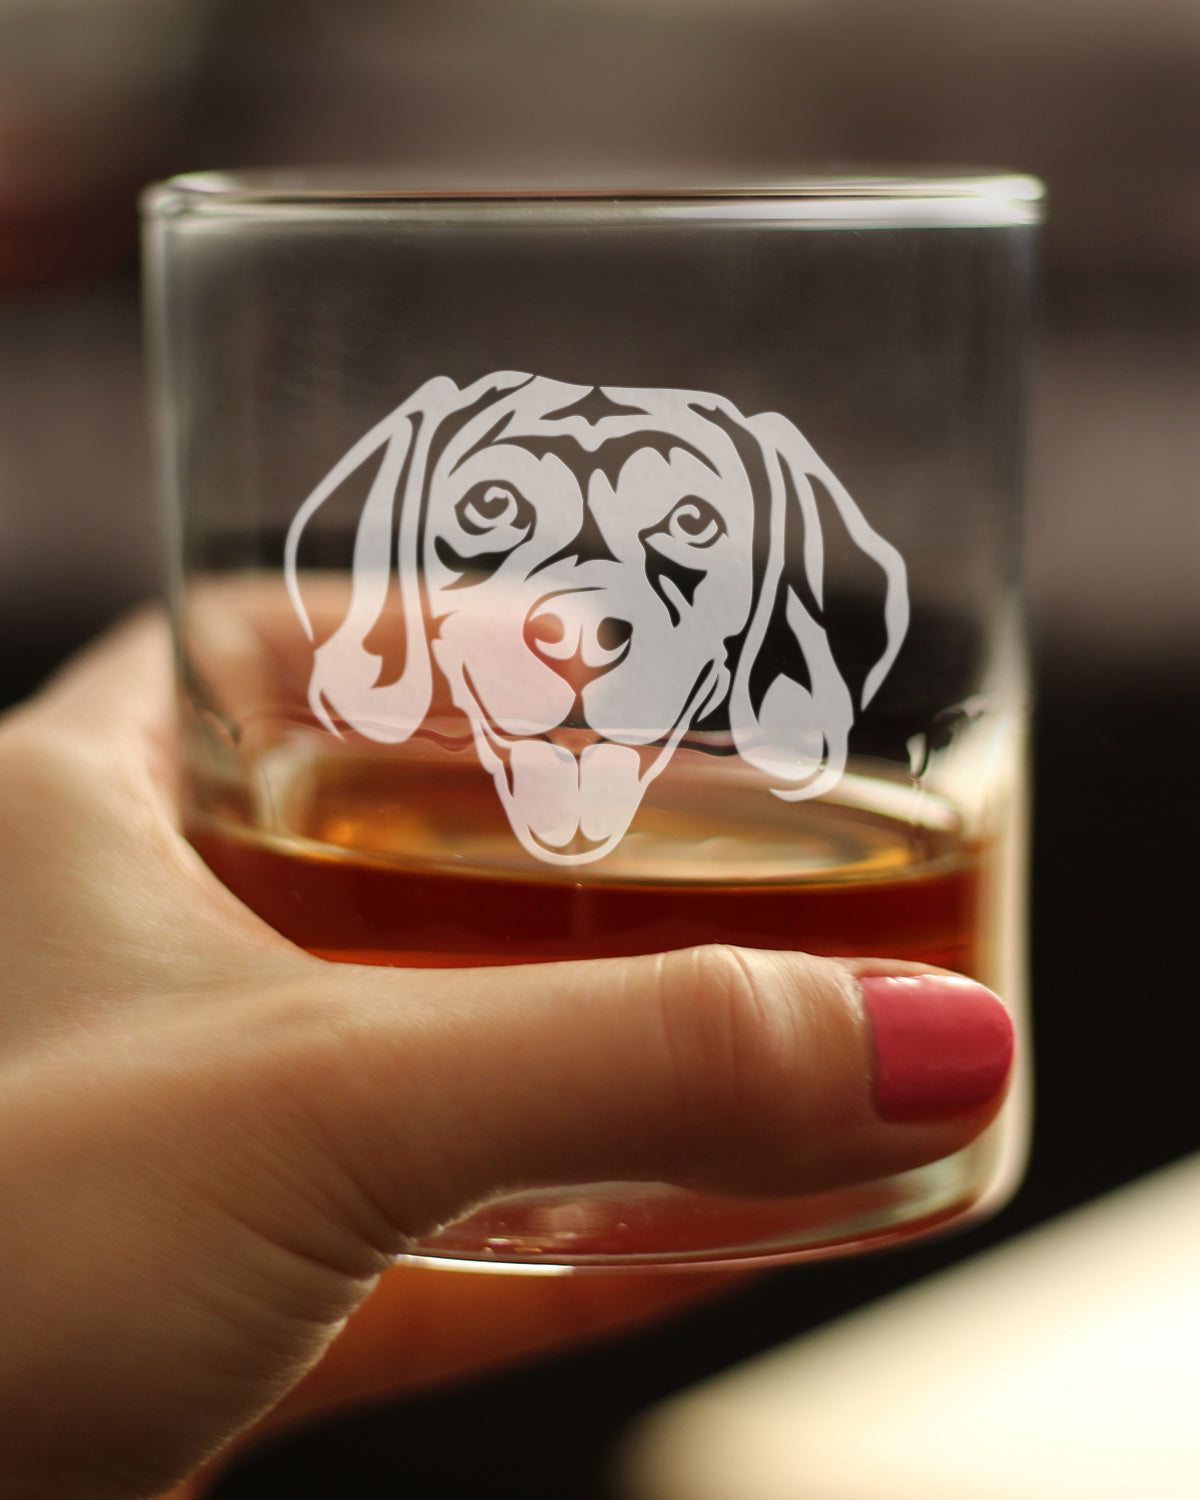 Happy Beagle Whiskey Rocks Glass - Fun Dog Themed Decor and Gifts for Moms &amp; Dads of Beagles - 10.25 Oz Glasses